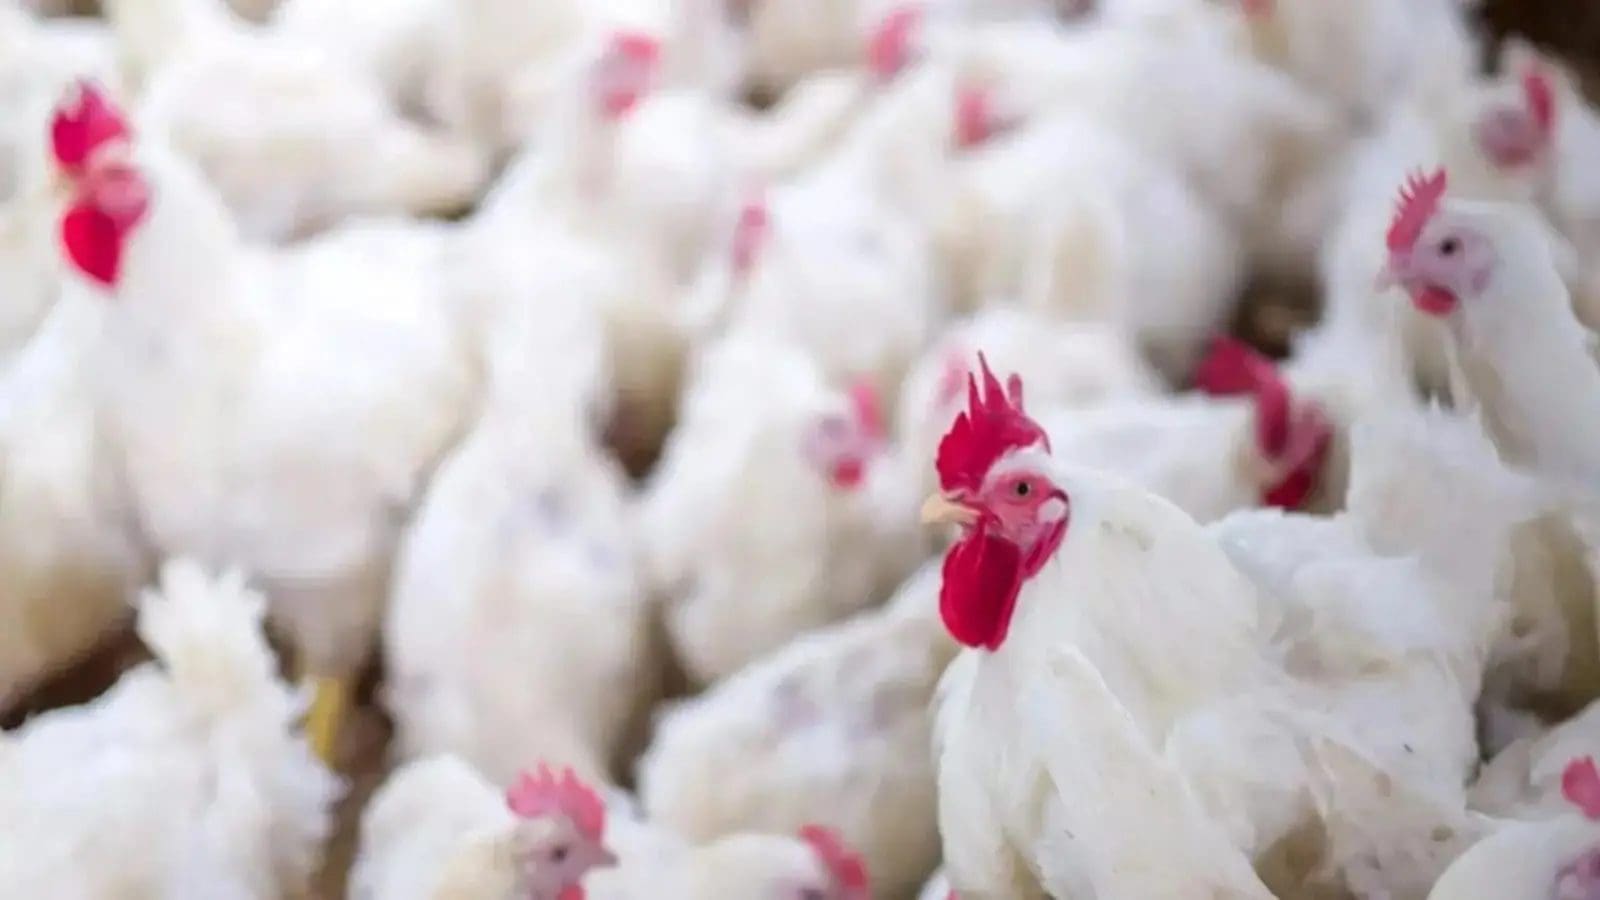 Namibia bans Argentina and Chile poultry imports due to avian influenza outbreak